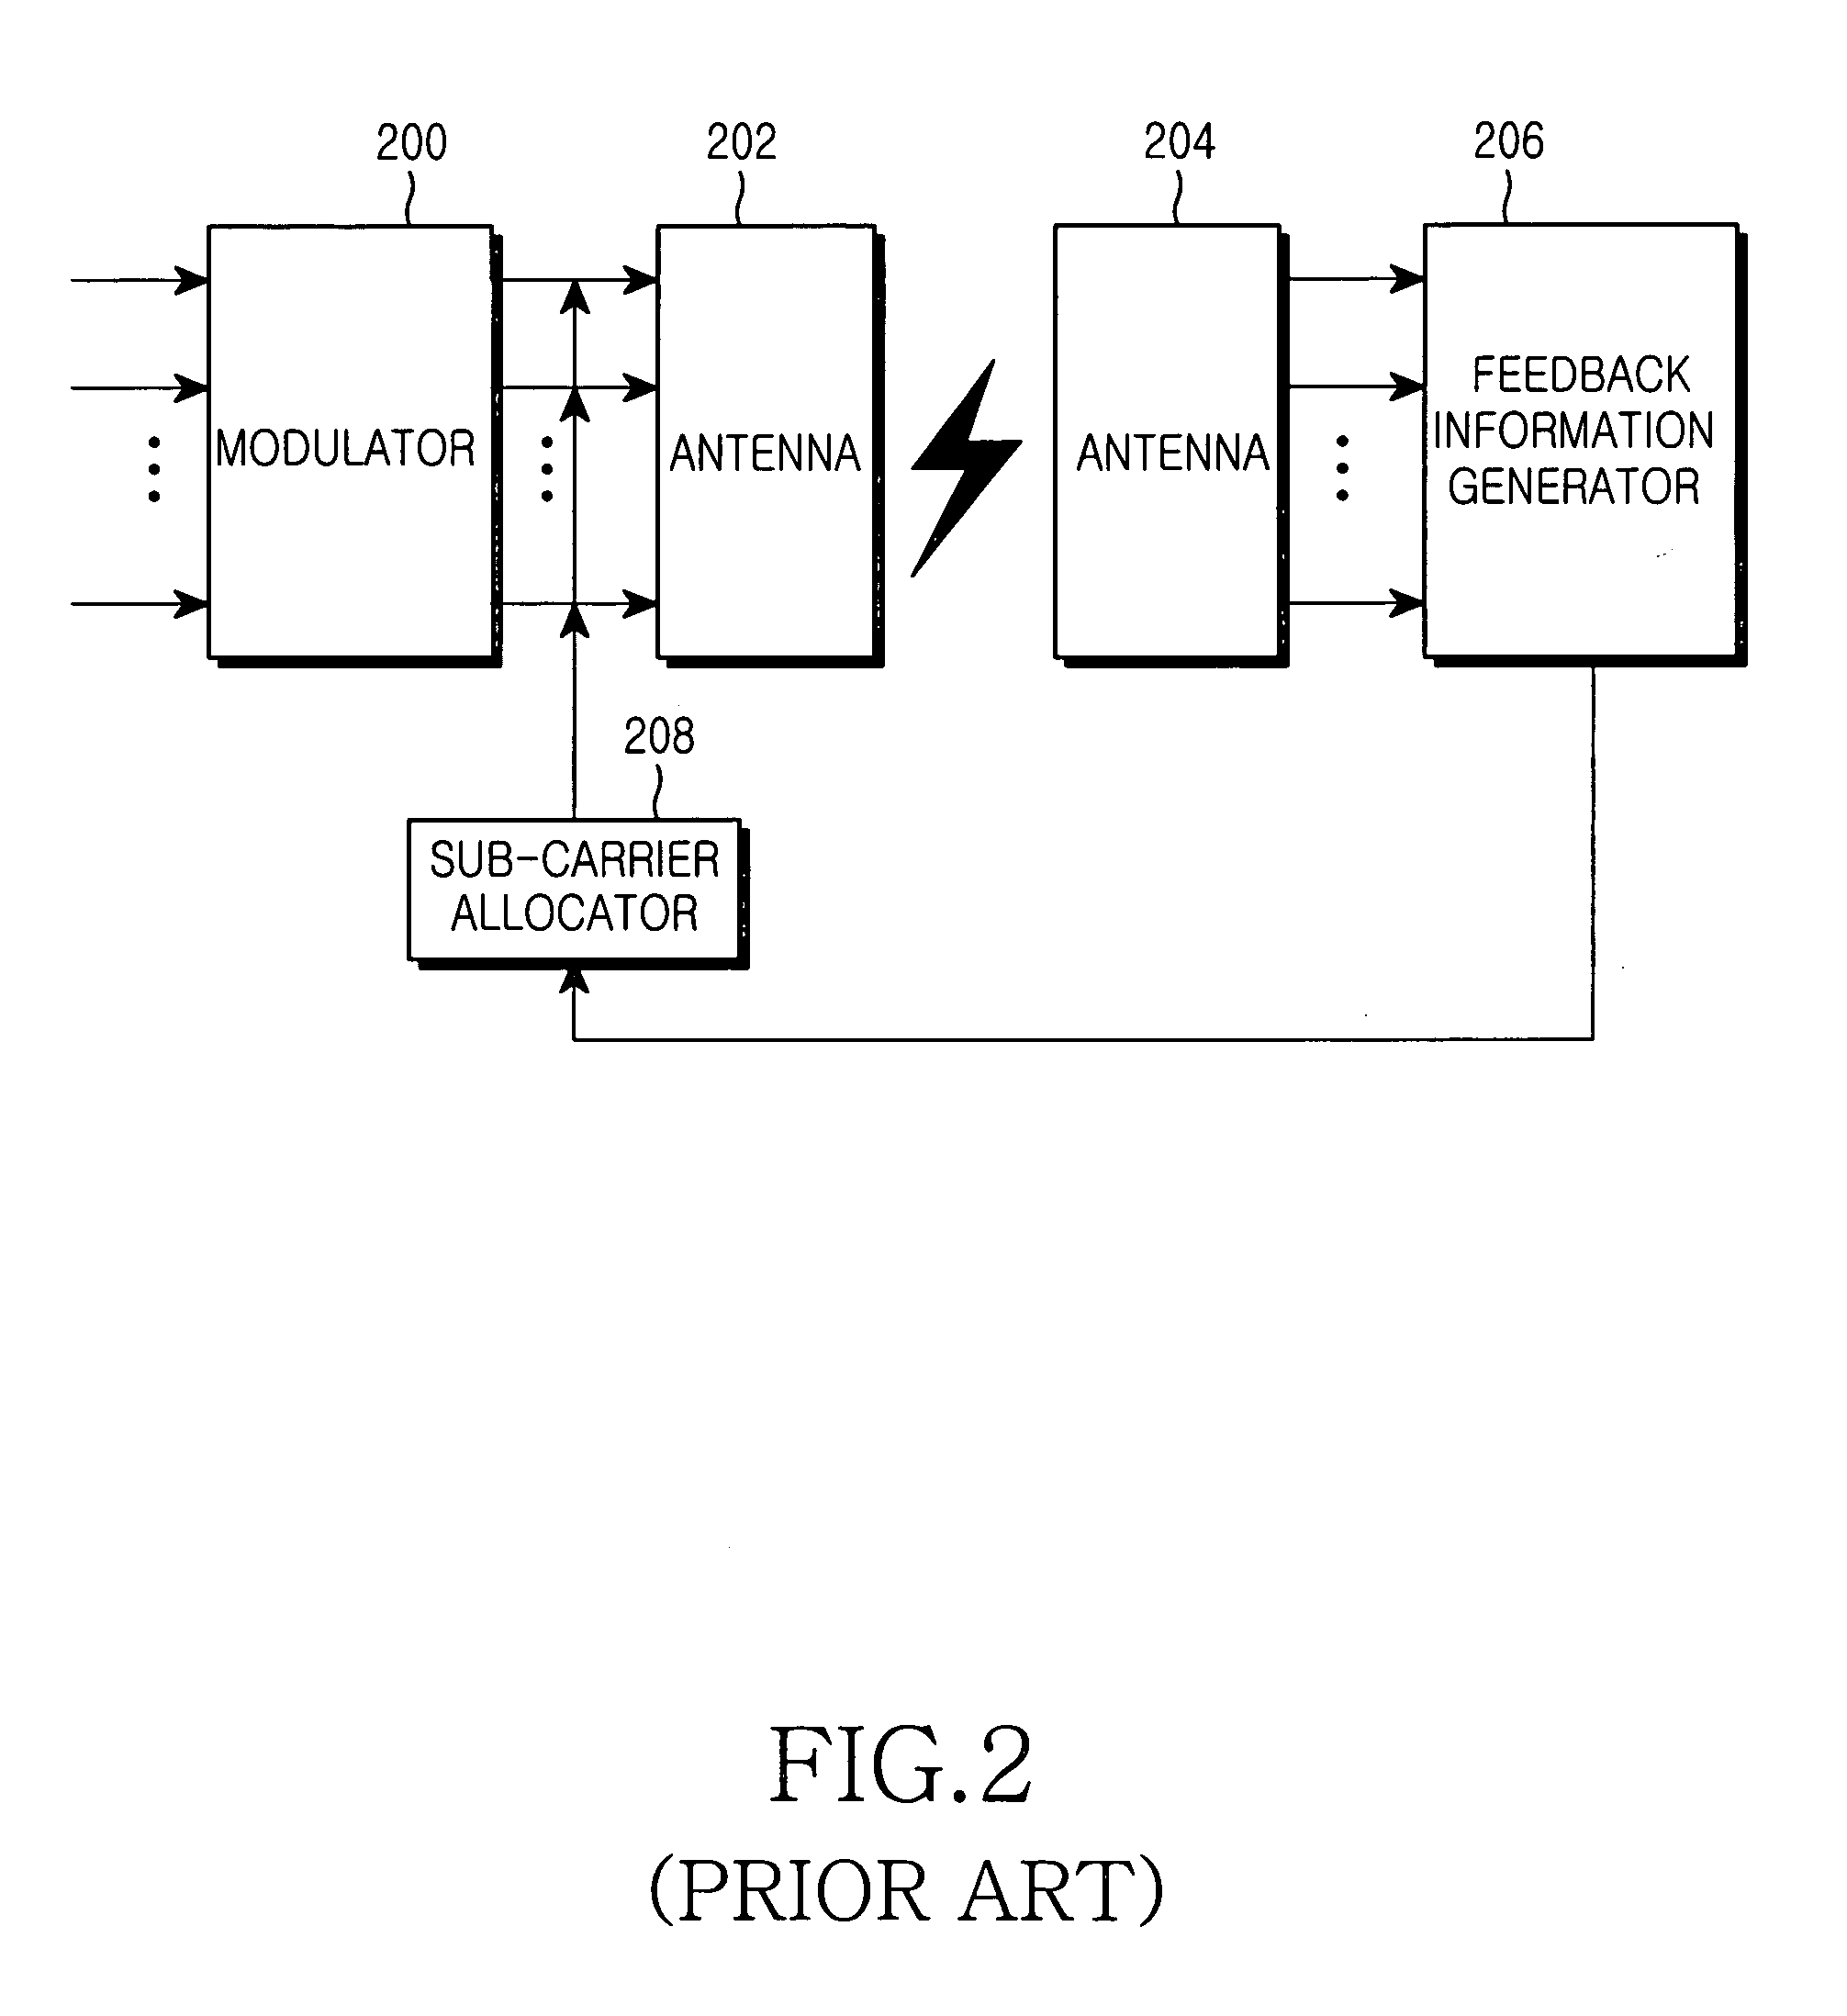 Apparatus and method for assigning sub-carriers in an orthogonal frequency division multiplex system